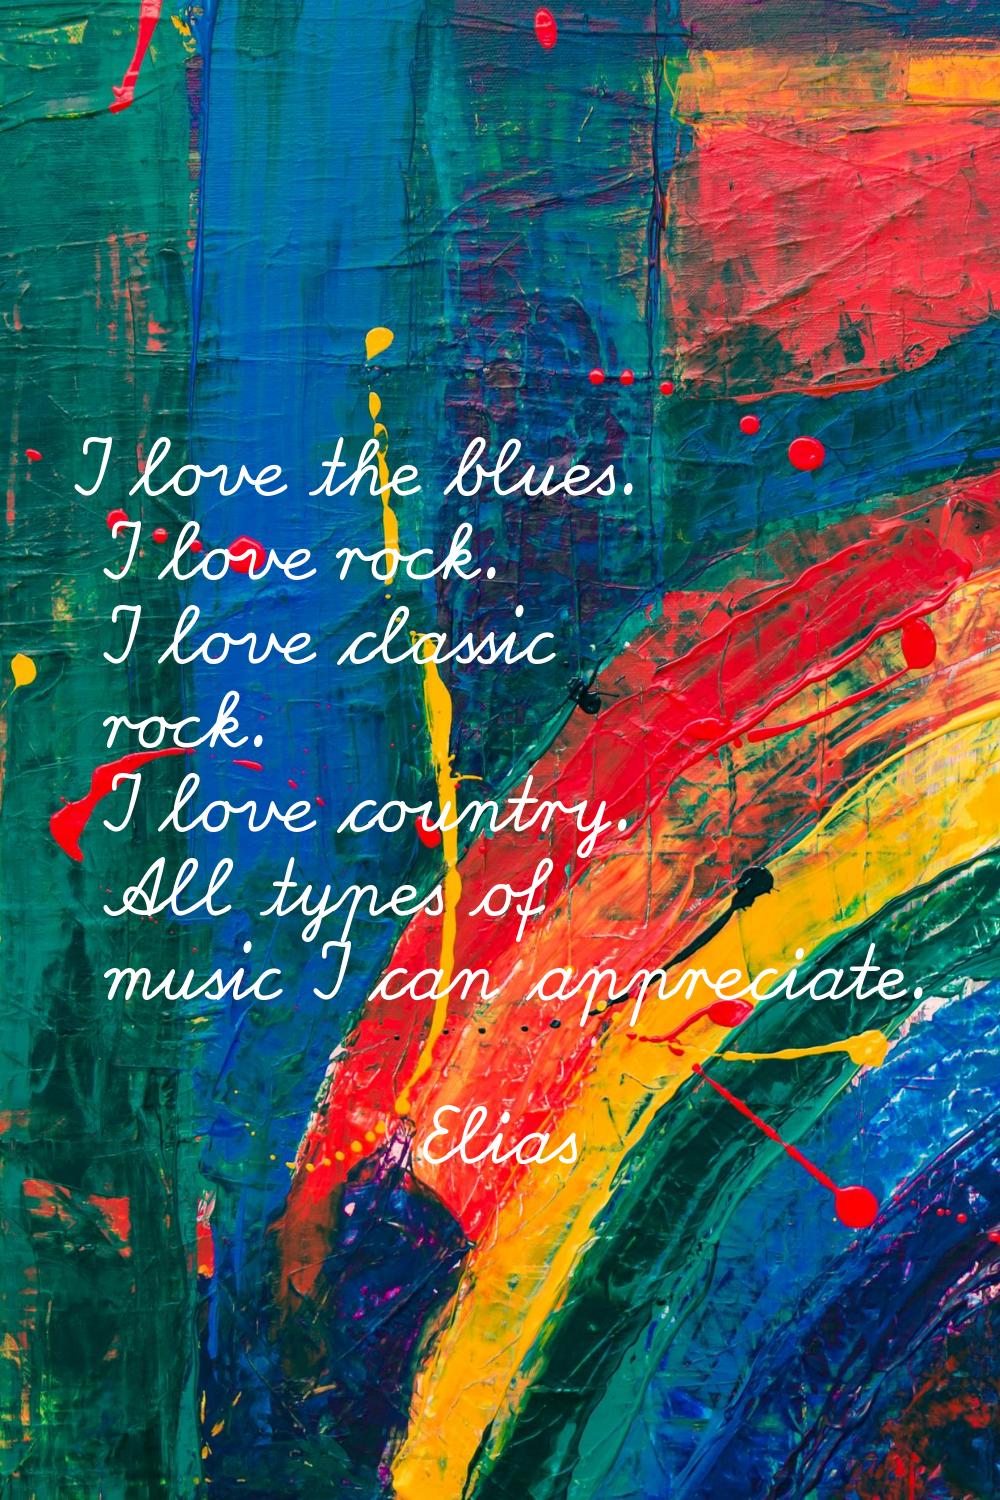 I love the blues. I love rock. I love classic rock. I love country. All types of music I can apprec